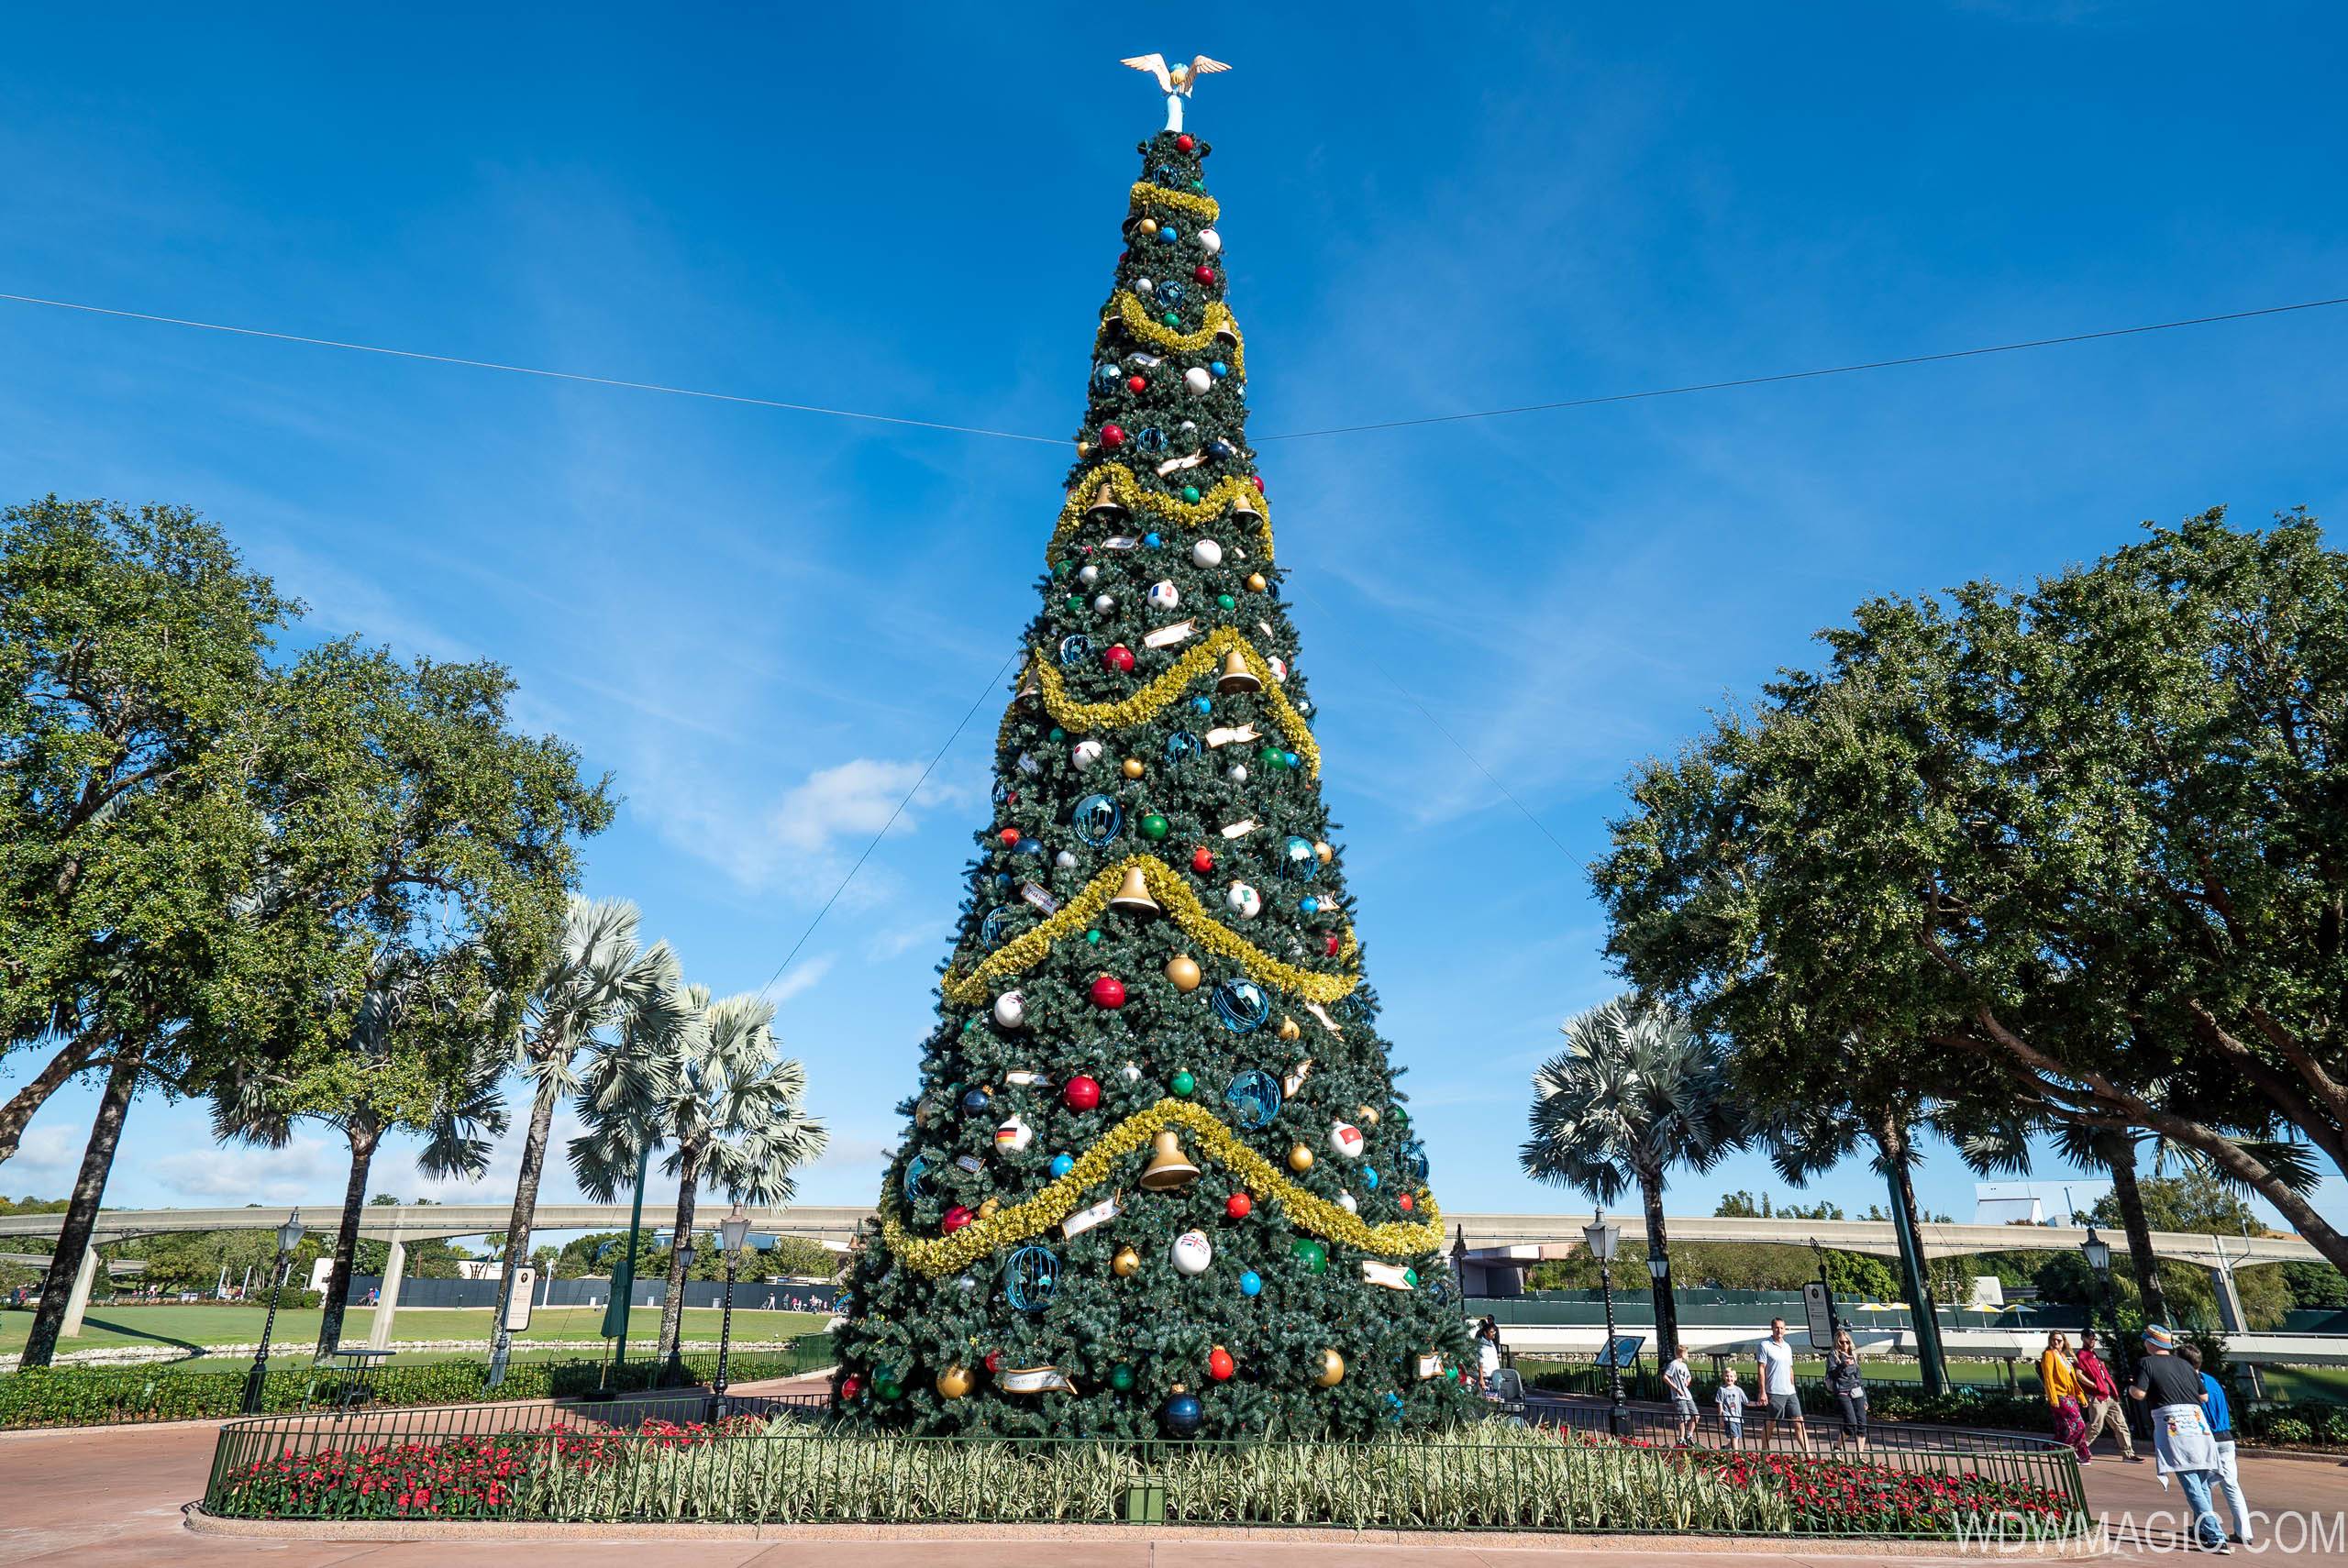 The EPCOT International Festival of the Holidays starts Nov. 26 and continues through Dec. 30. 